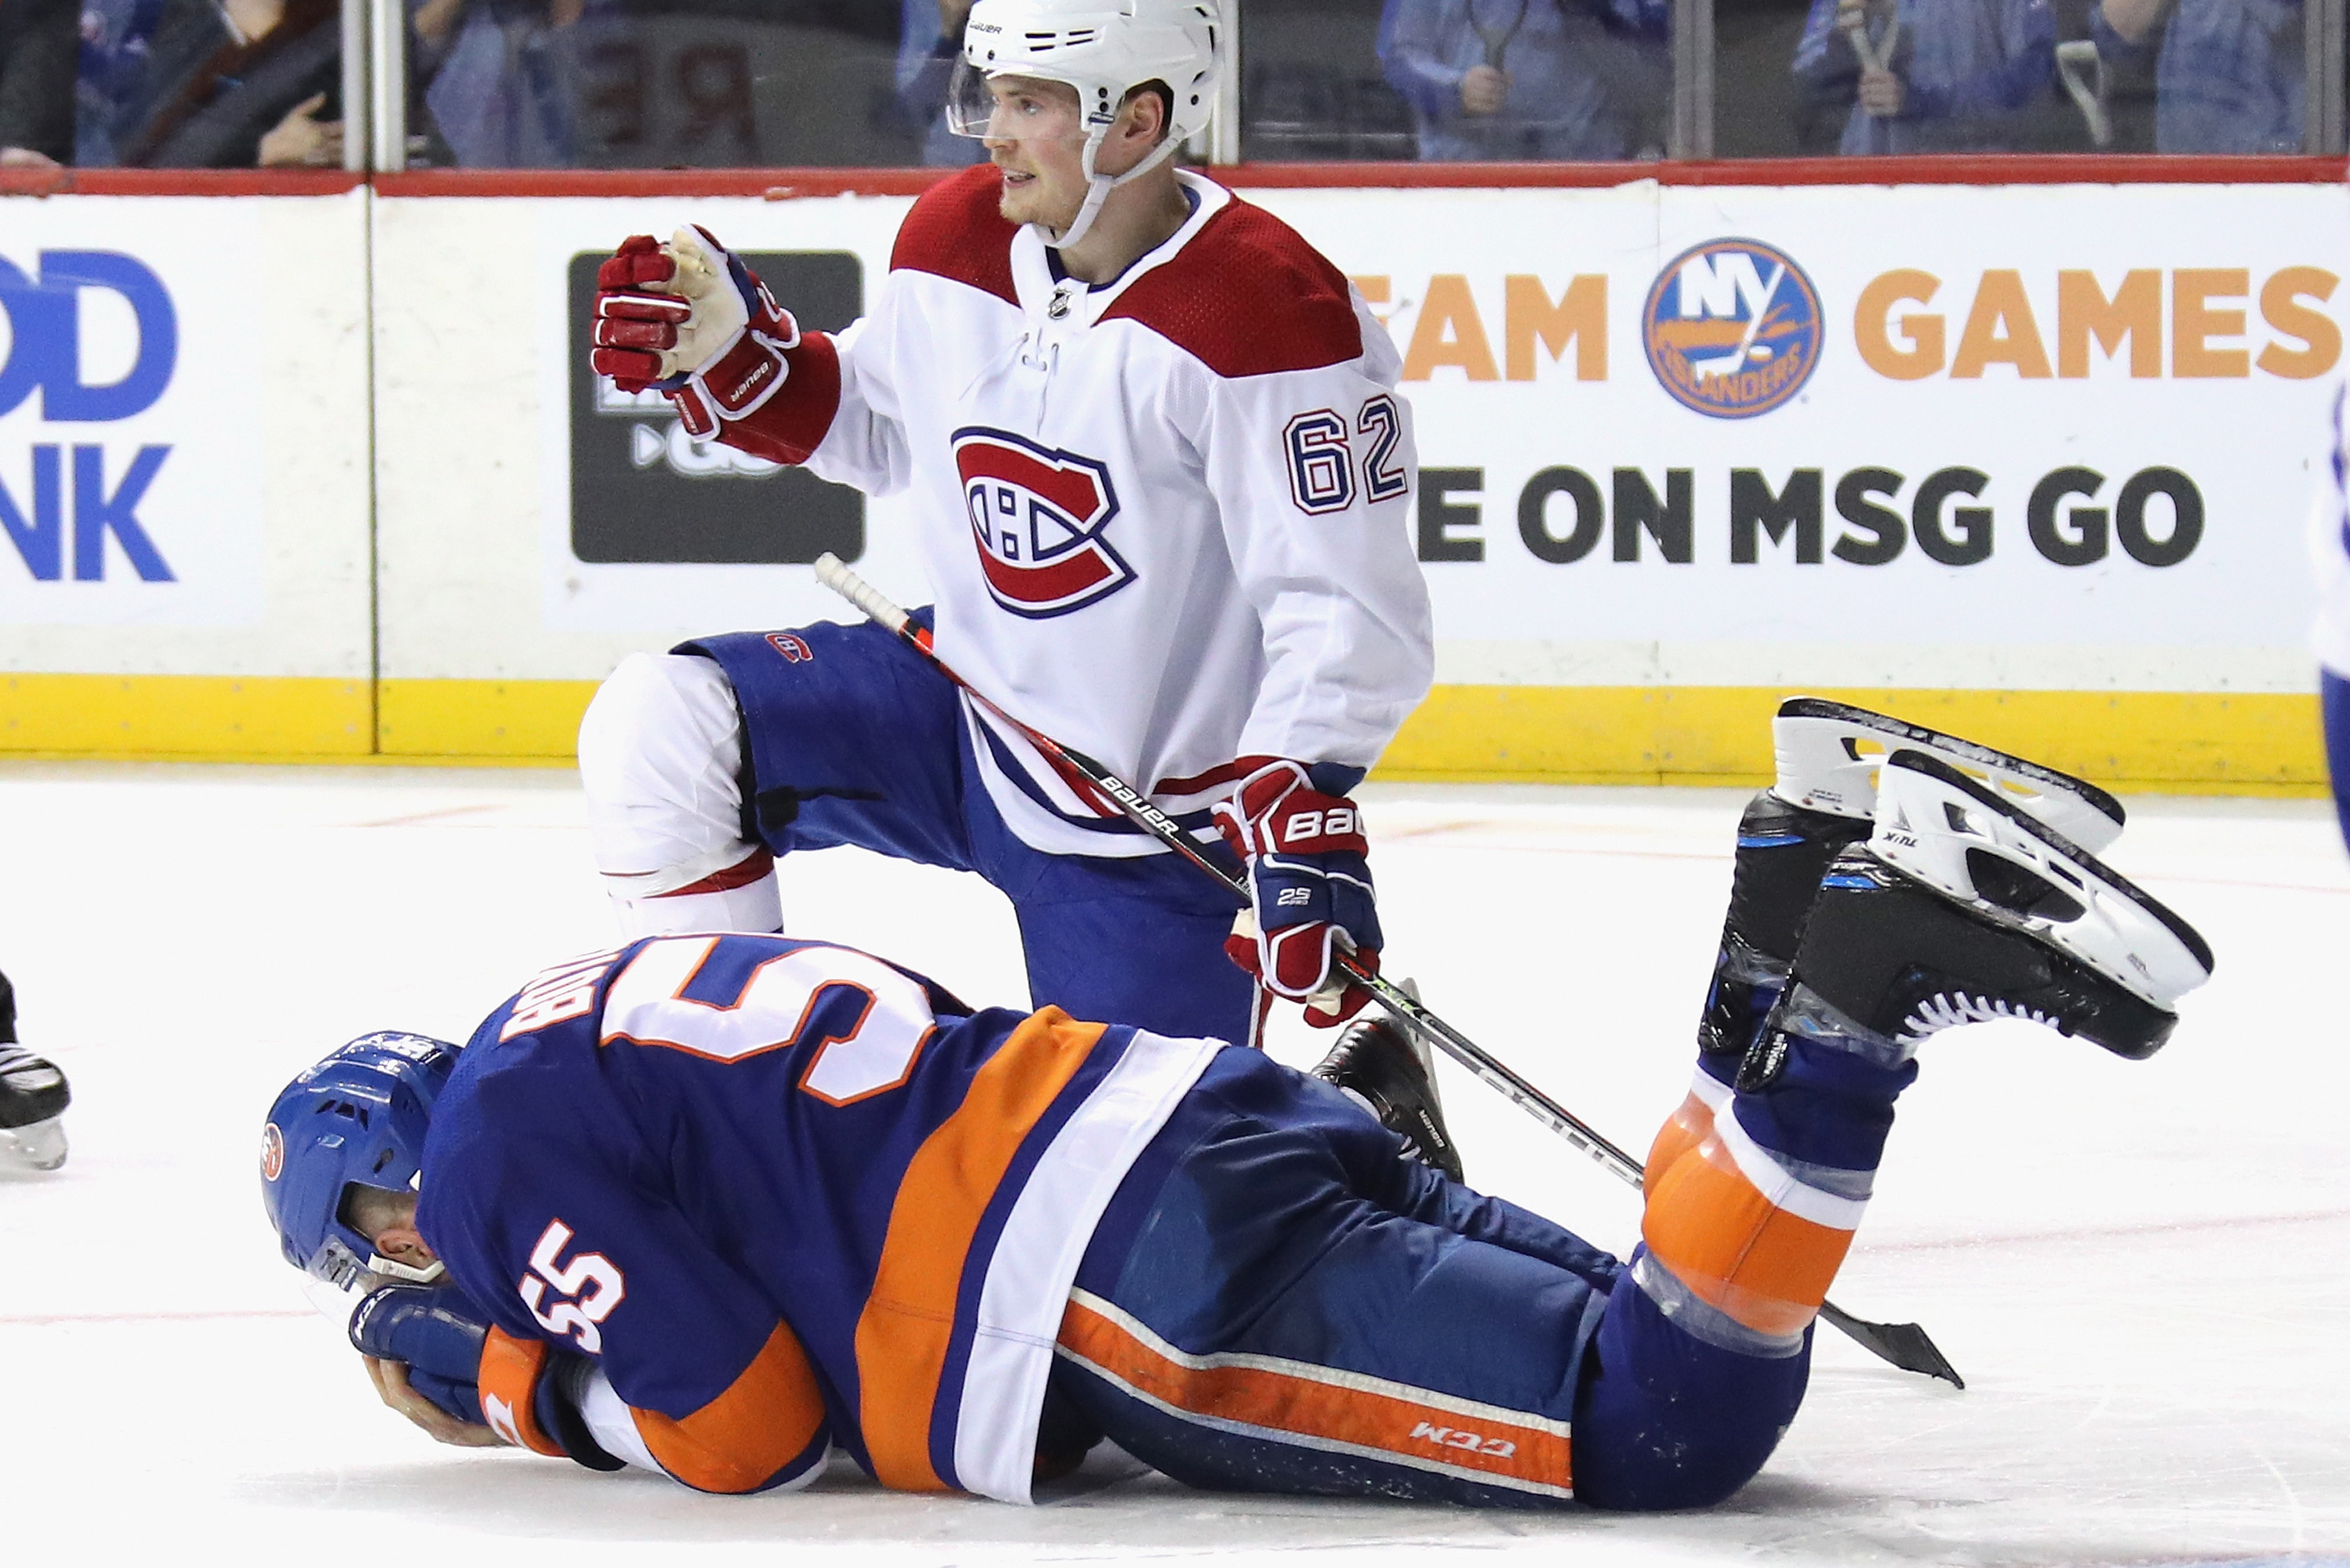 Isles' Boychuk gets 90 stitches after taking skate to face